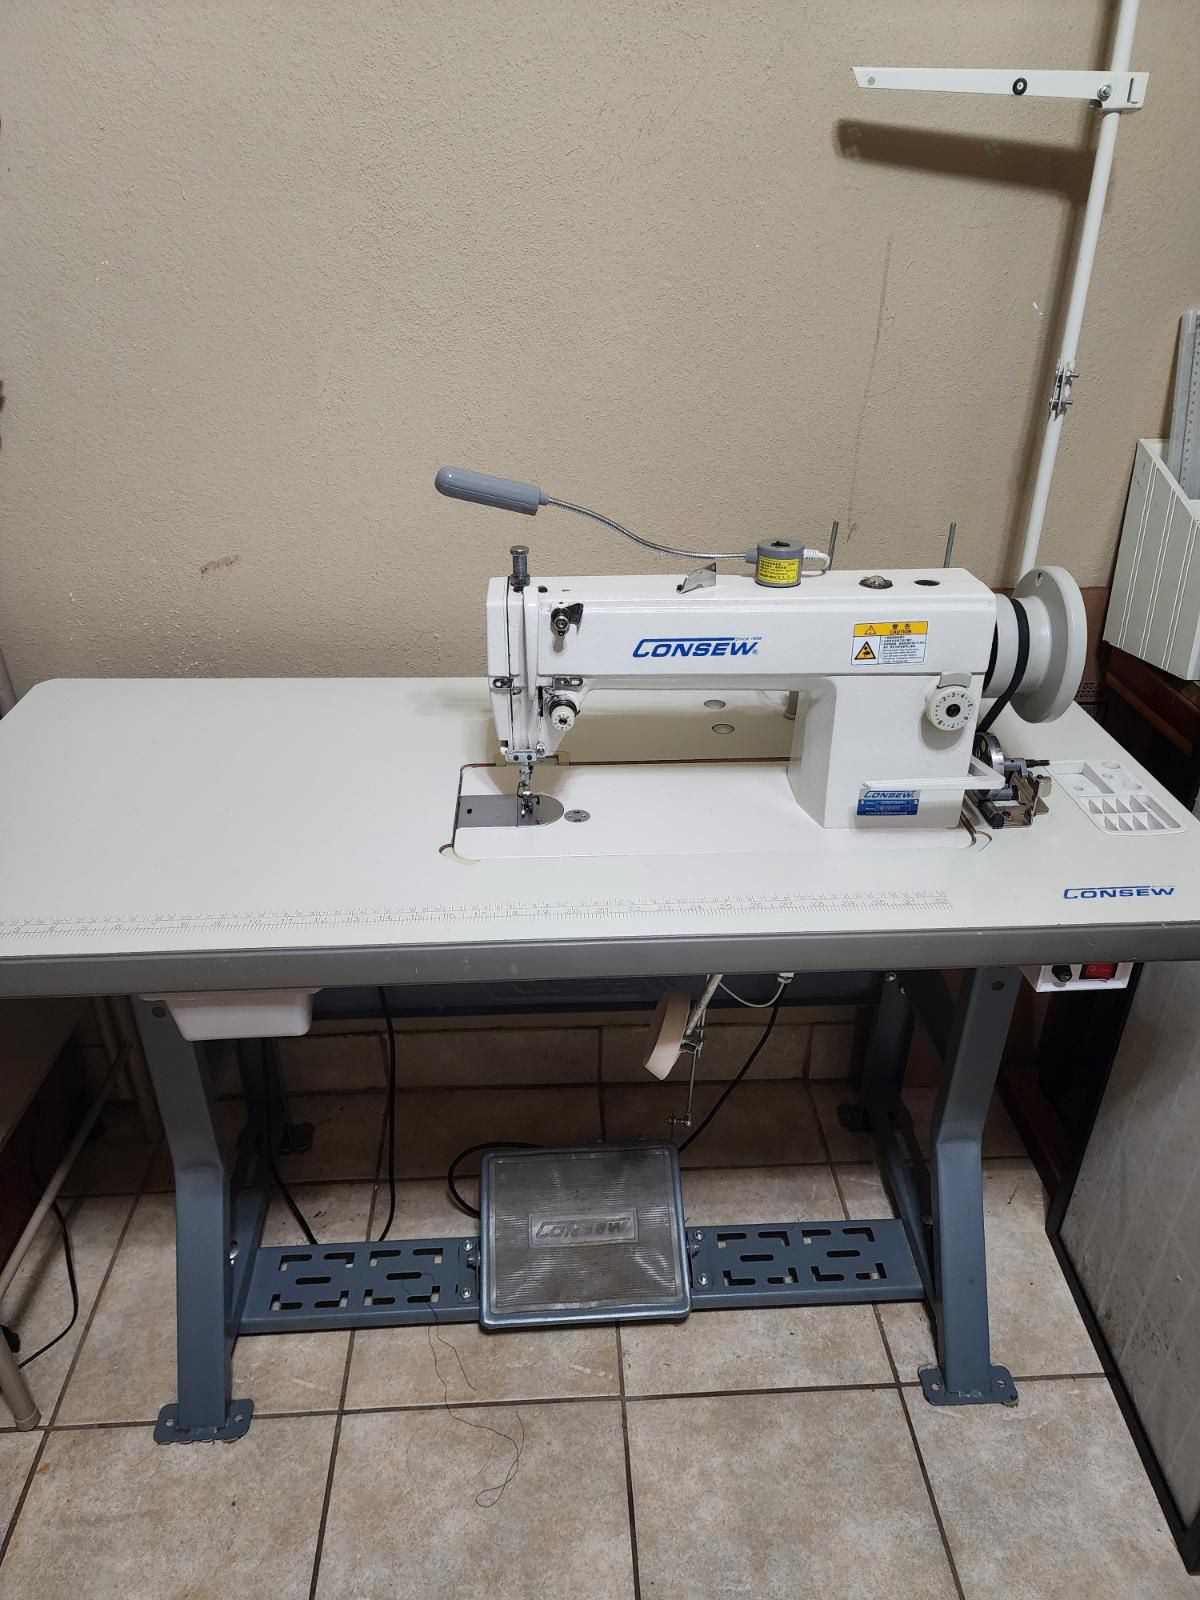 Consew Industrial Sewing Machine